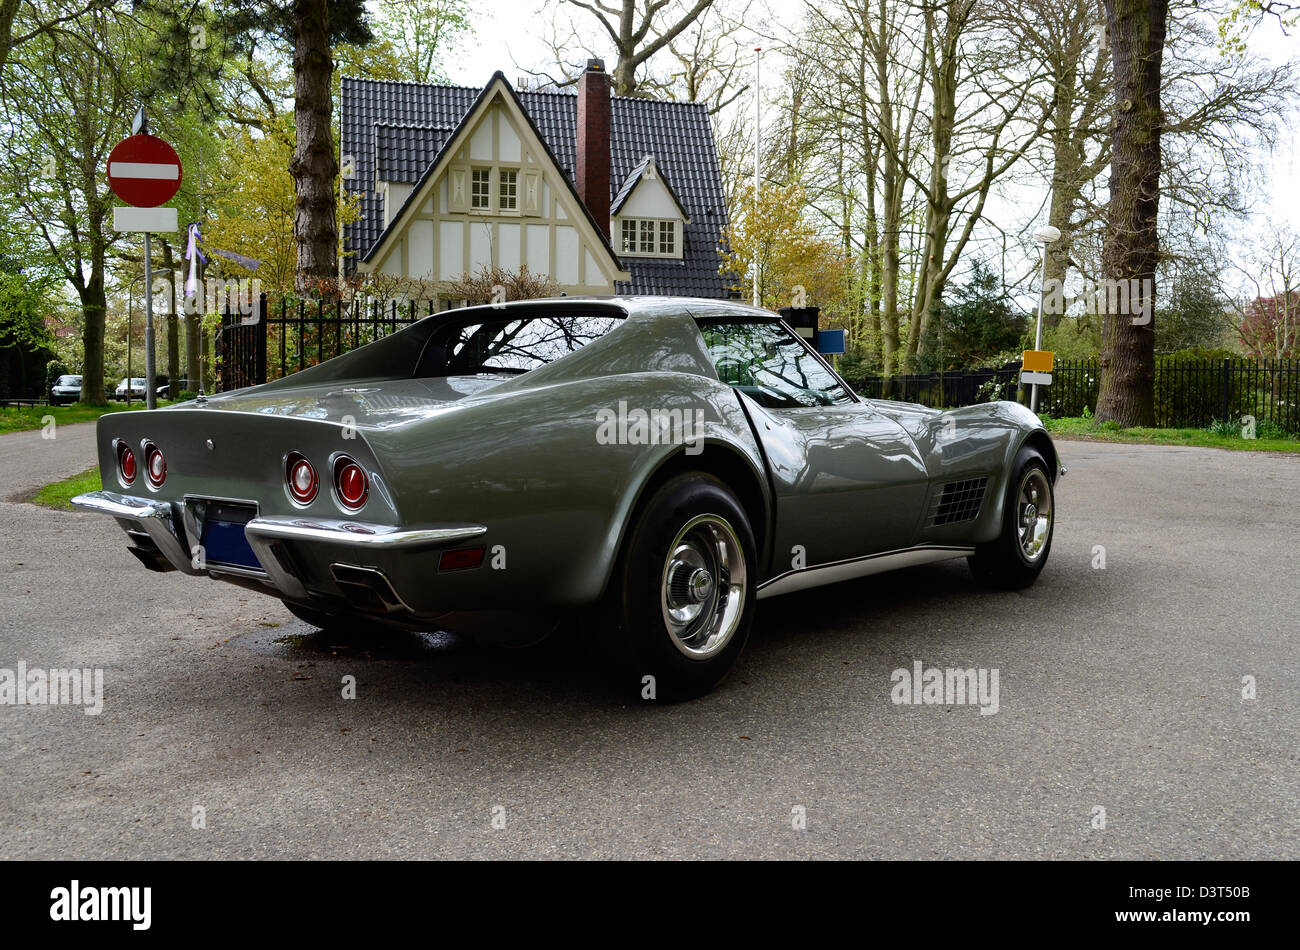 Iconic sportscar Chevrolet Corvette C3 Stingray in silver-grey in front of a luxury house. Stock Photo